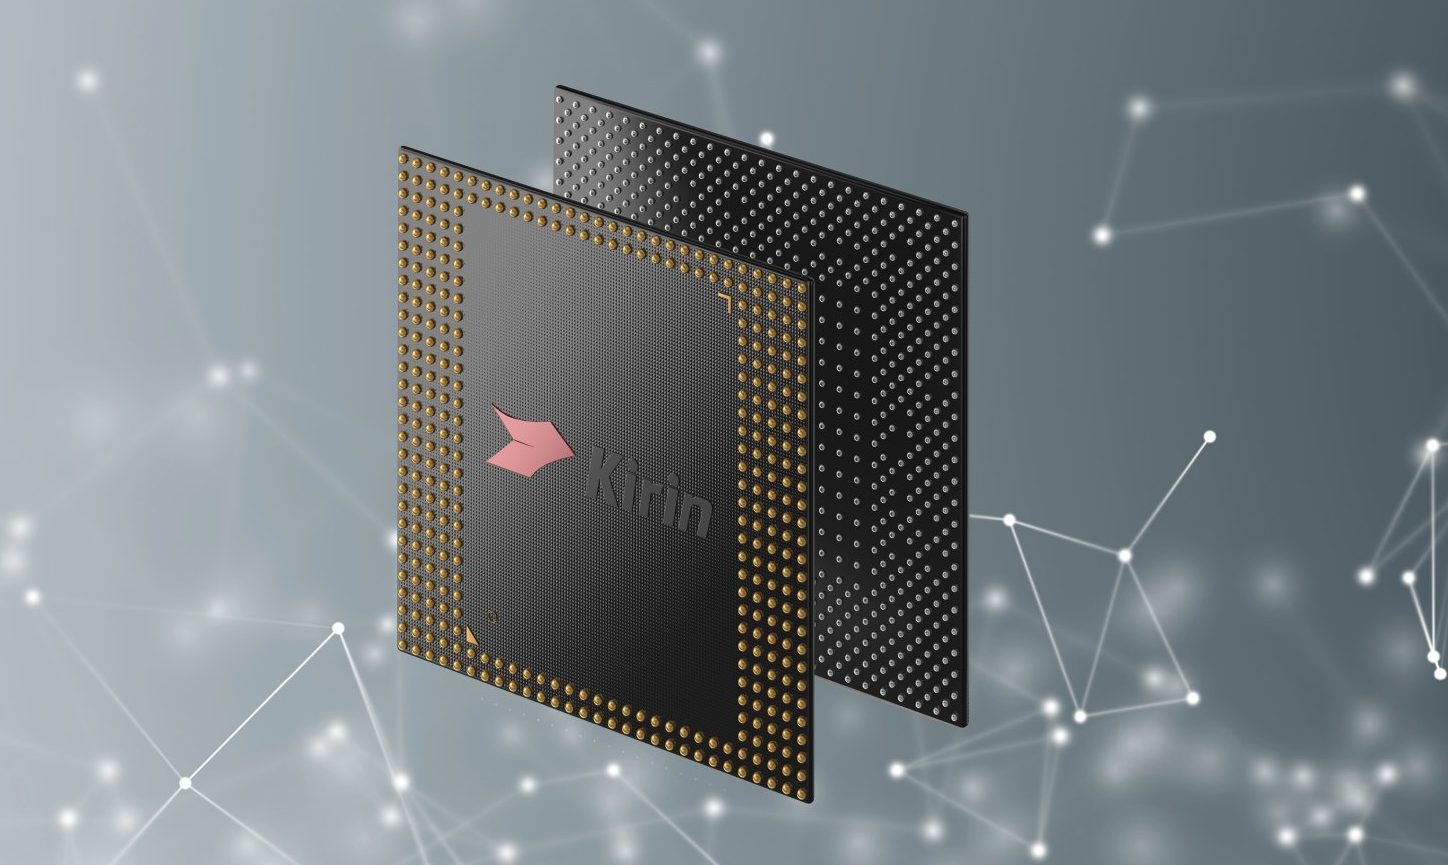 Huawei to announce Kirin 9000 flagship chipset at IFA 2020 on September 3